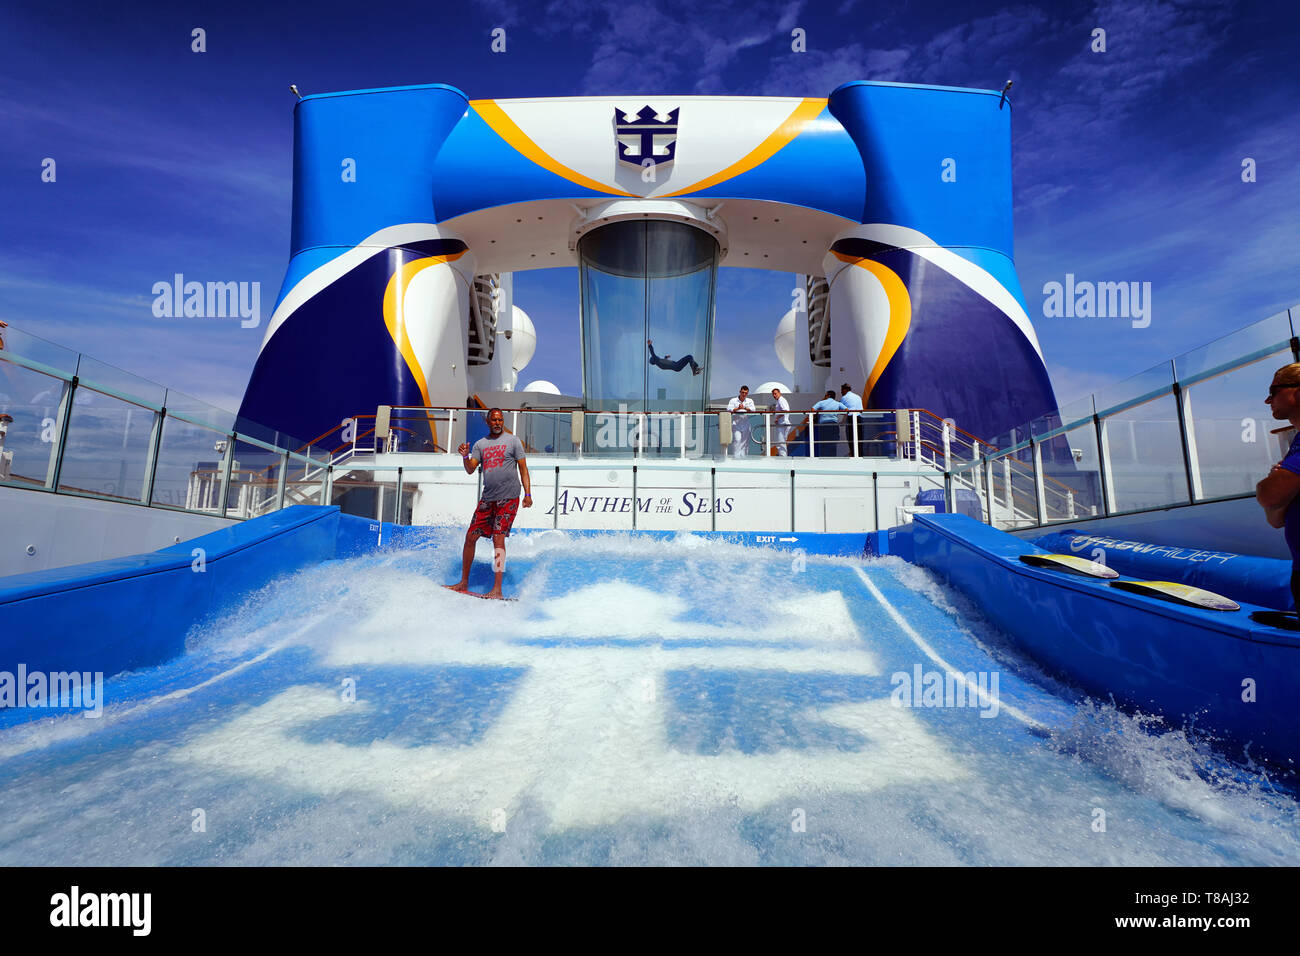 Flowrider, Deck 15, Anthem of the Seas, Royal Caribbean Cruise Ship. Banque D'Images